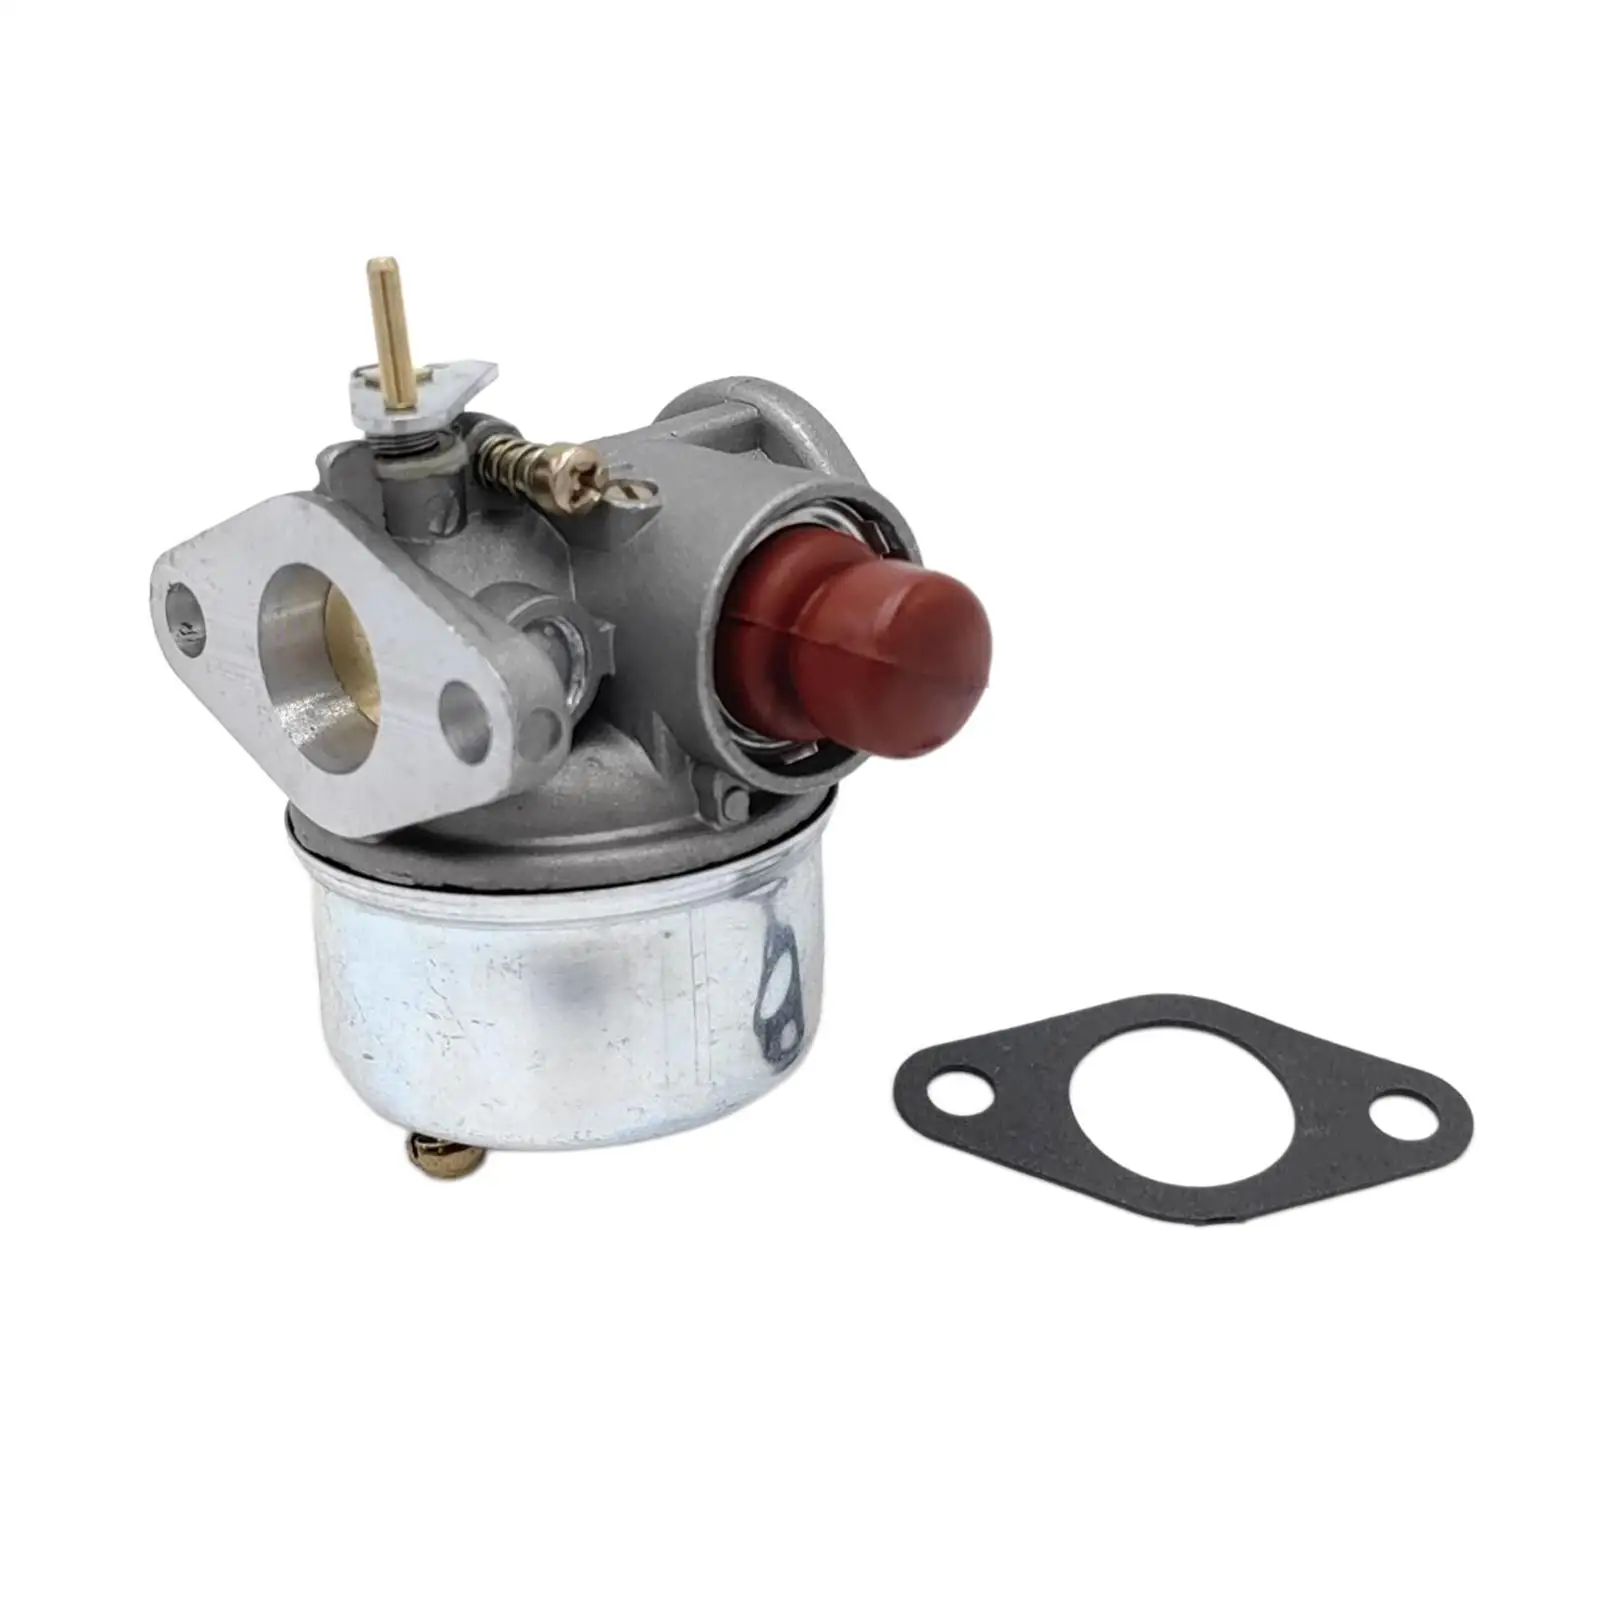 Carburetor Durable Engine Lawn Mower 2308.8010 with Gasket Easy to Install